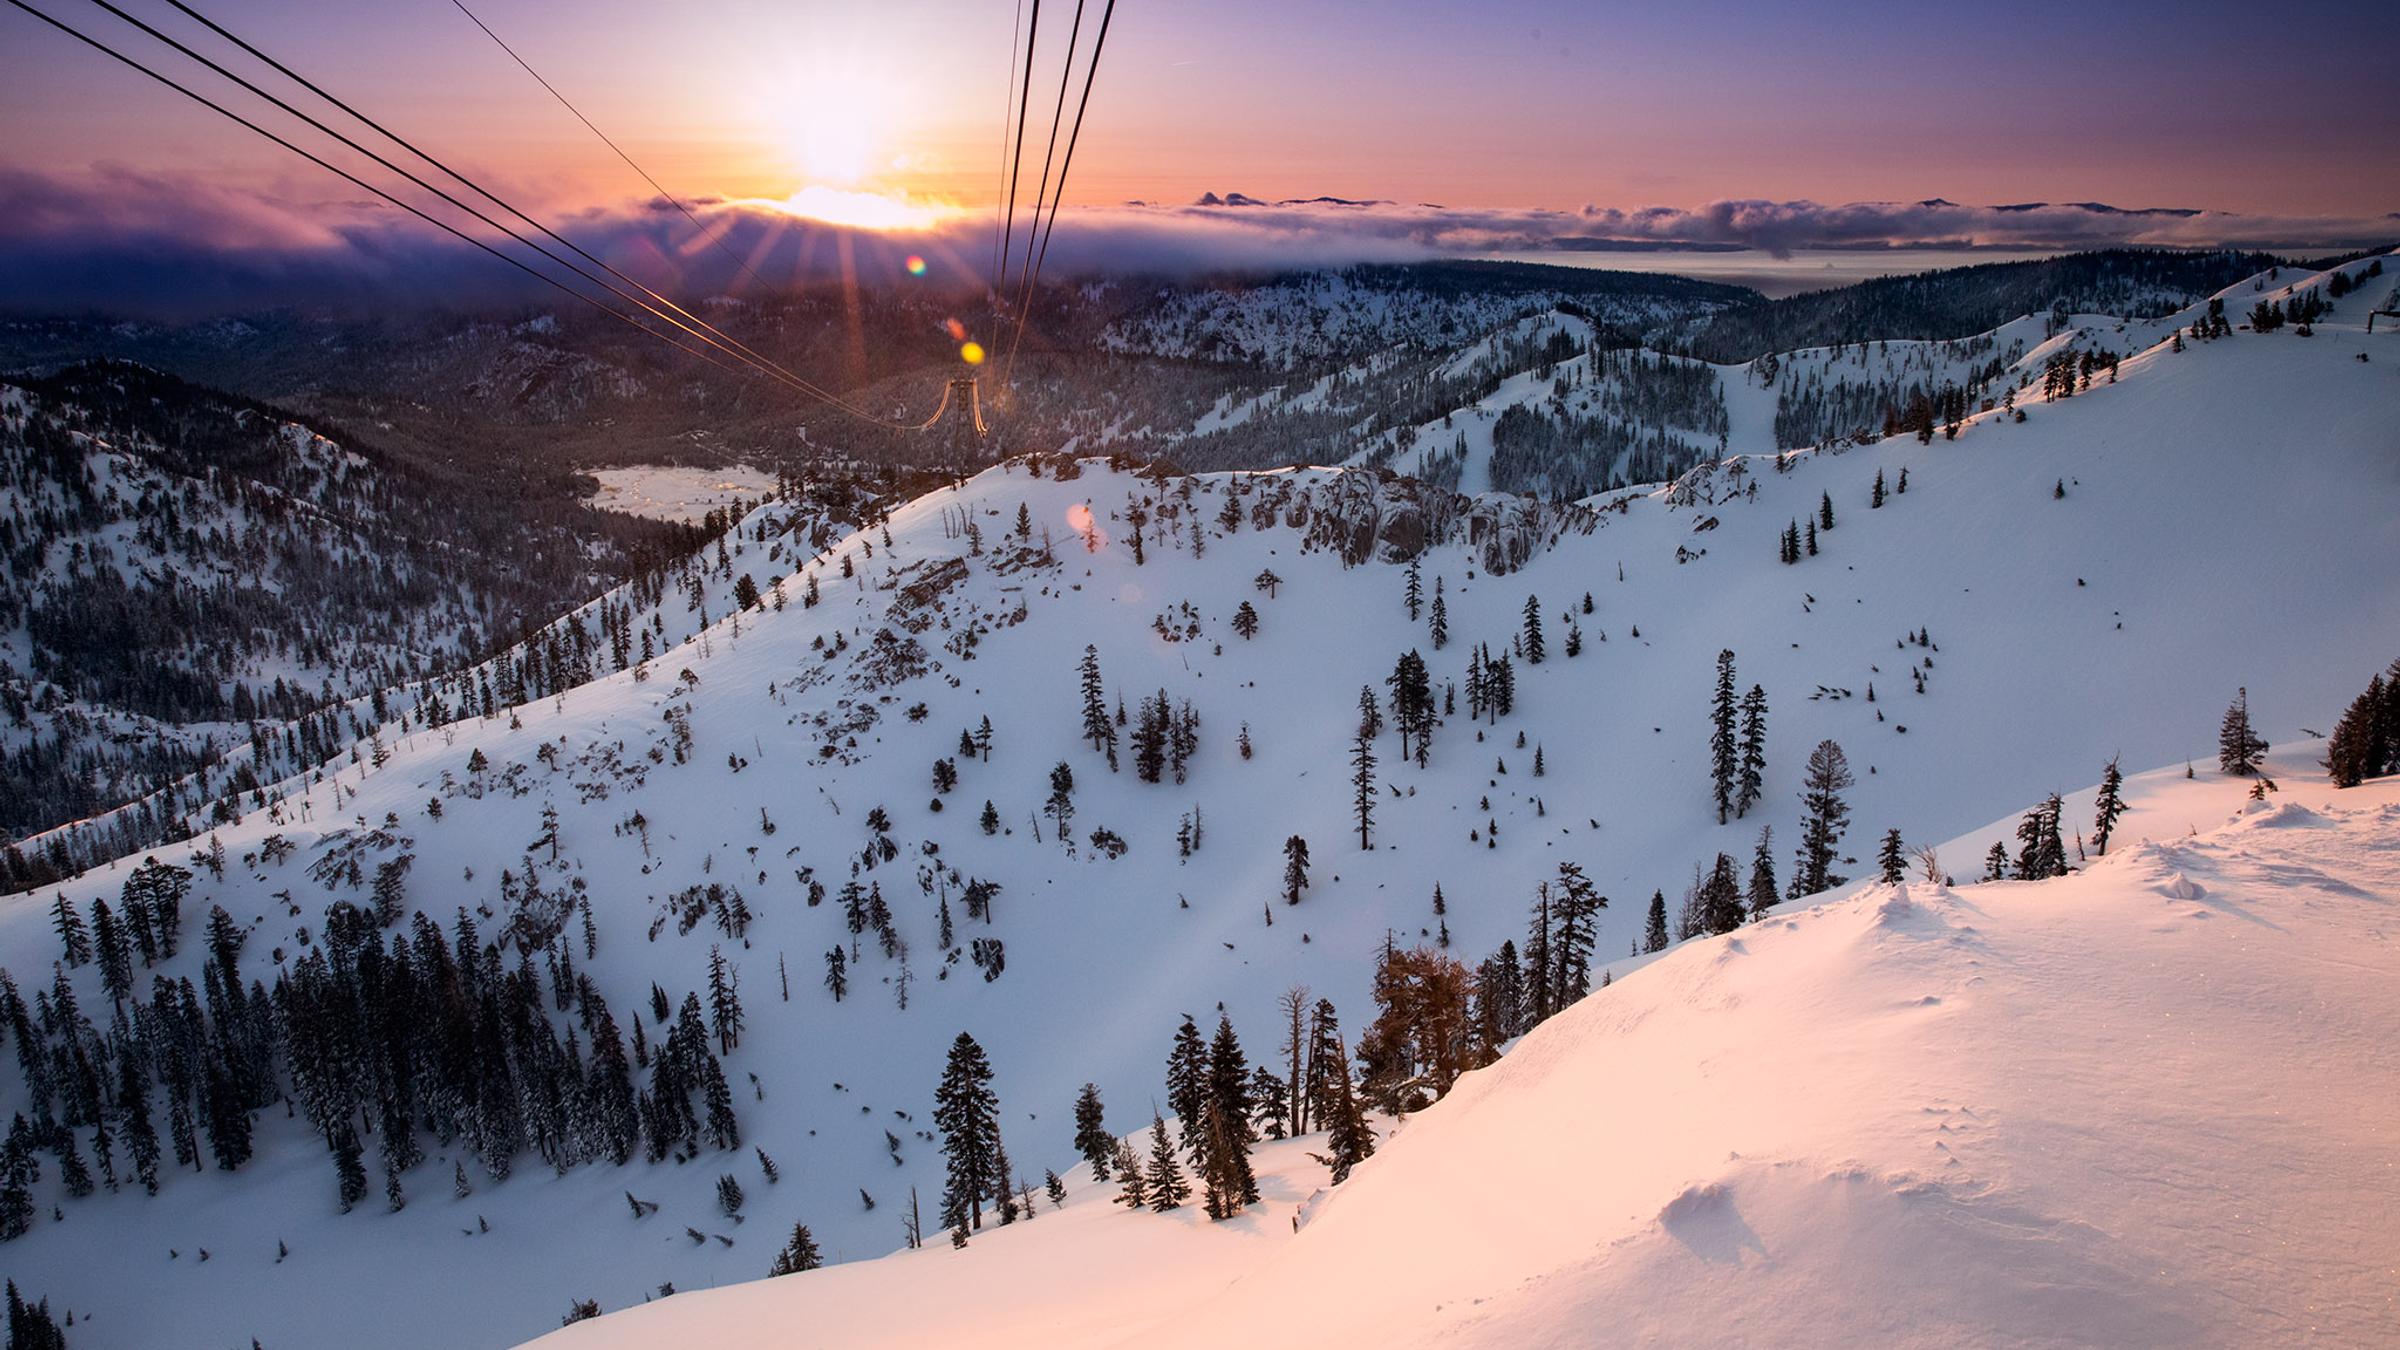 Aerial Tram scenic at Squaw Valley during sunset